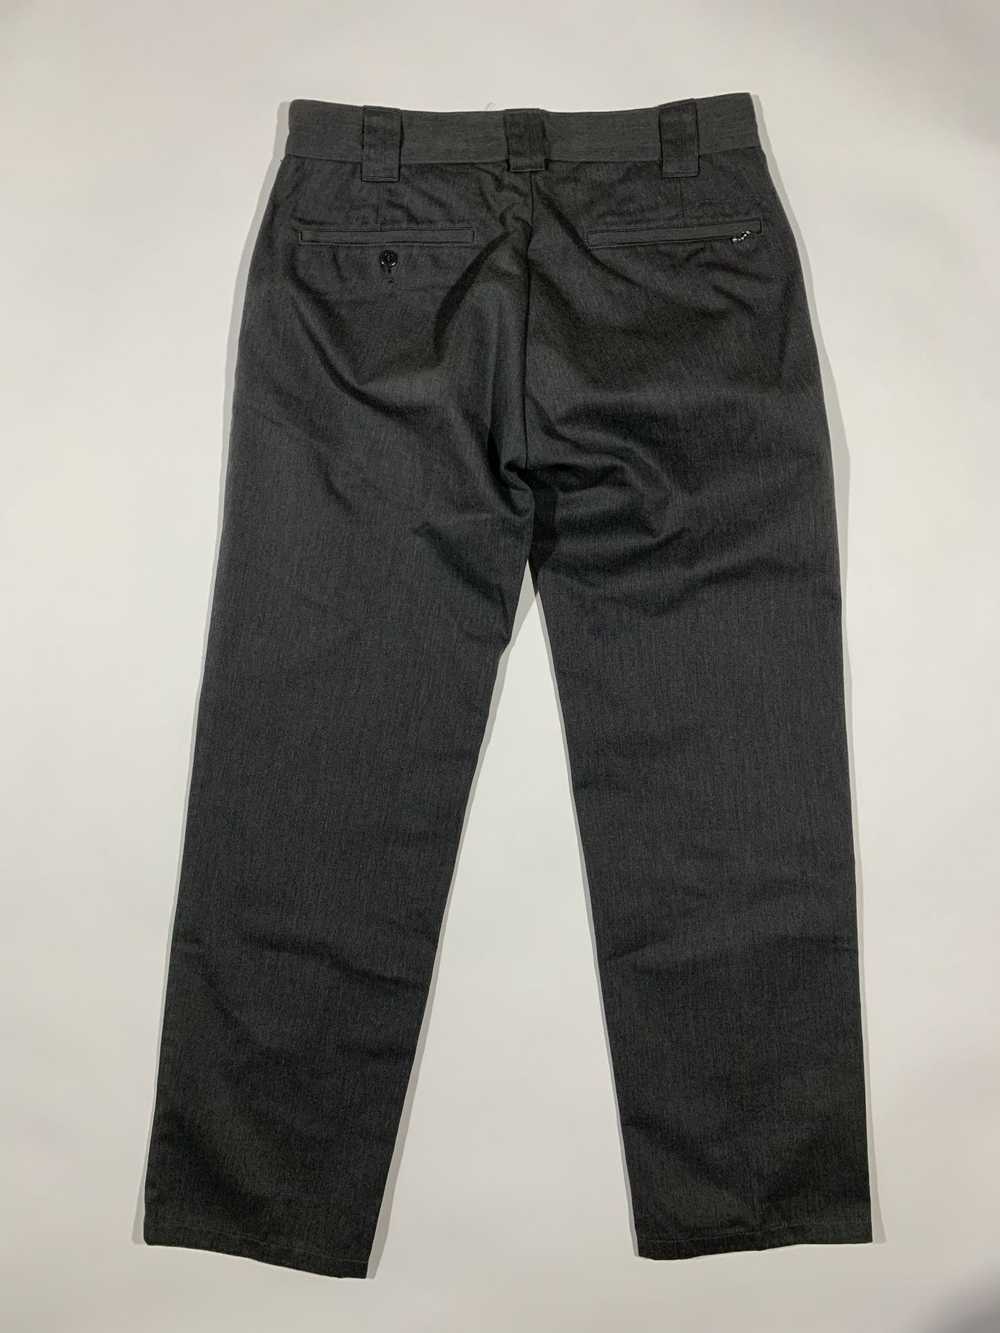 Goodenough SS03 Punk Trousers - image 2